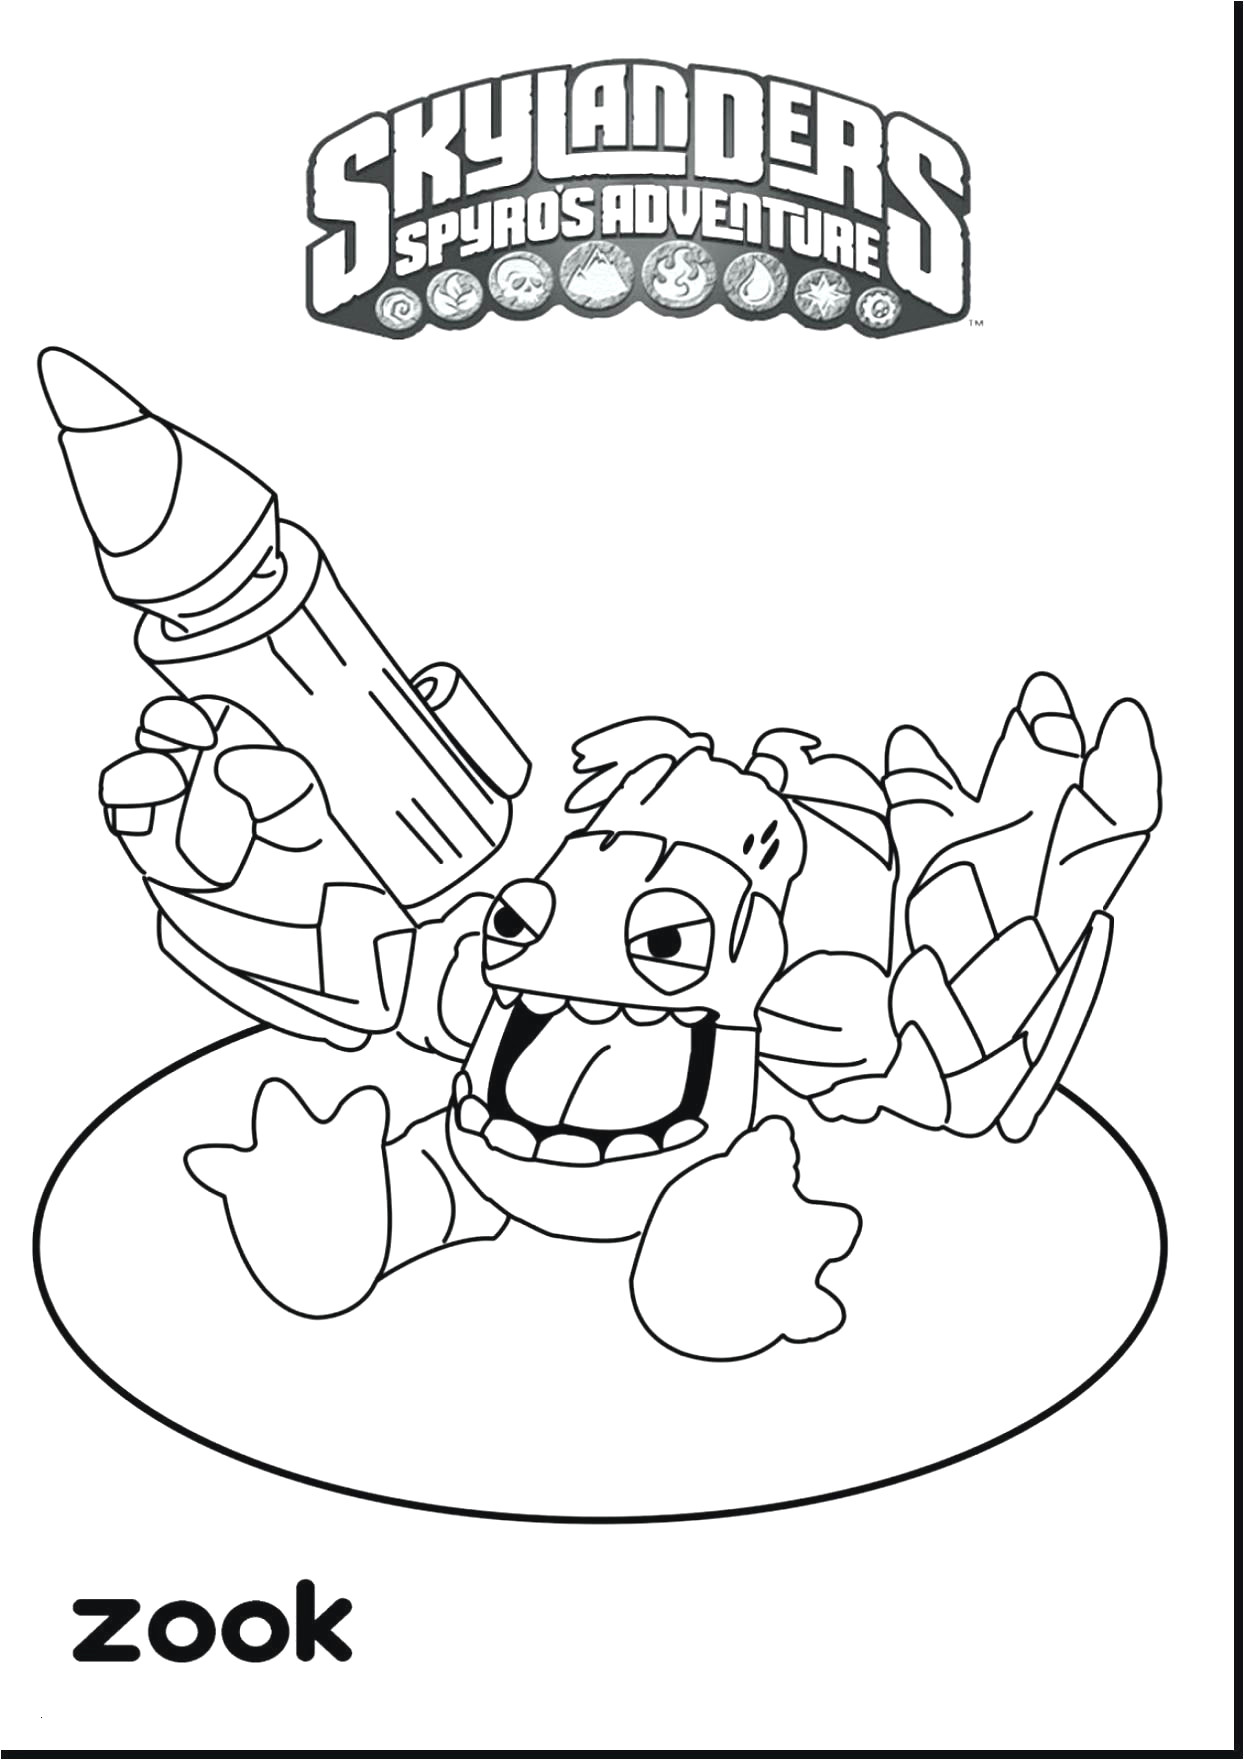 coloring pages dragons cool coloring page inspirational witch coloring pages new crayola pages 0d coloring